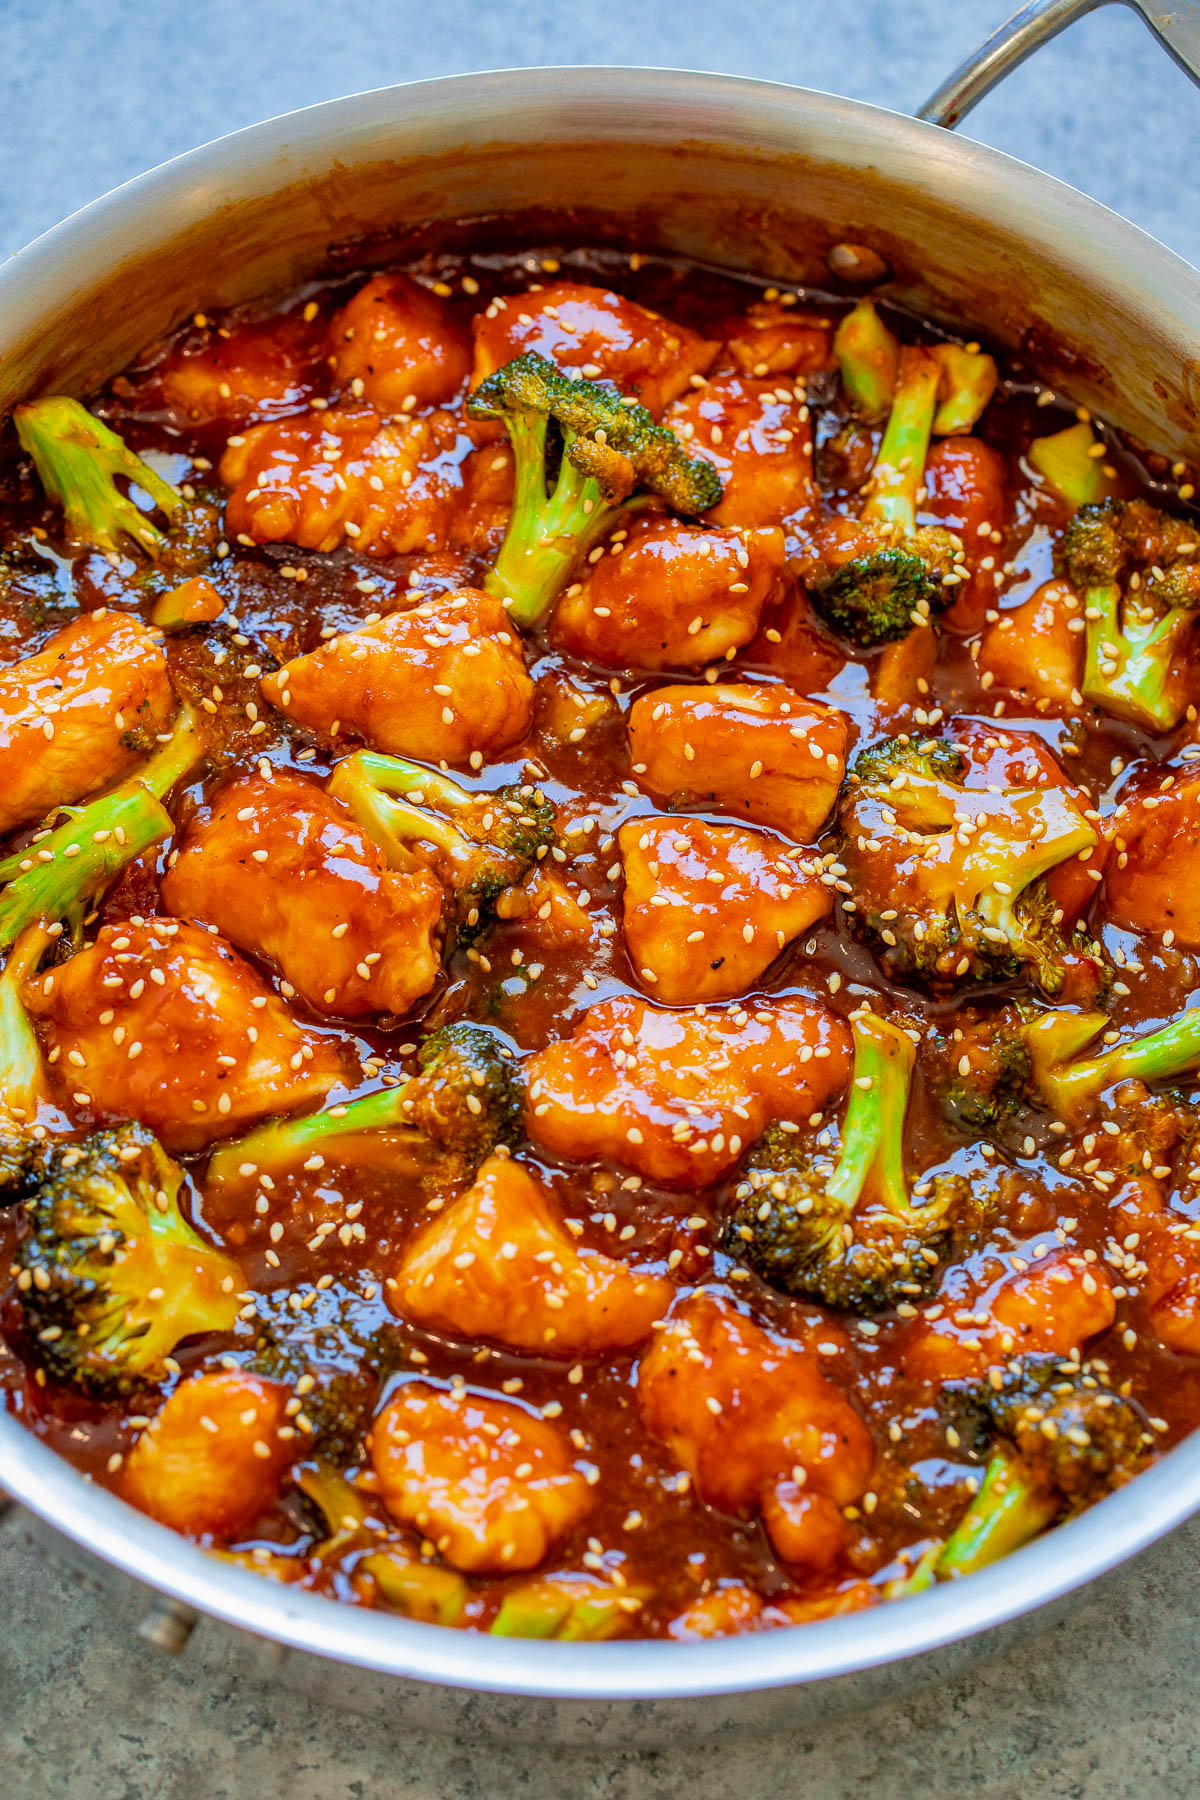 Sticky chicken and broccoli in a thick sauce, garnished with sesame seeds.